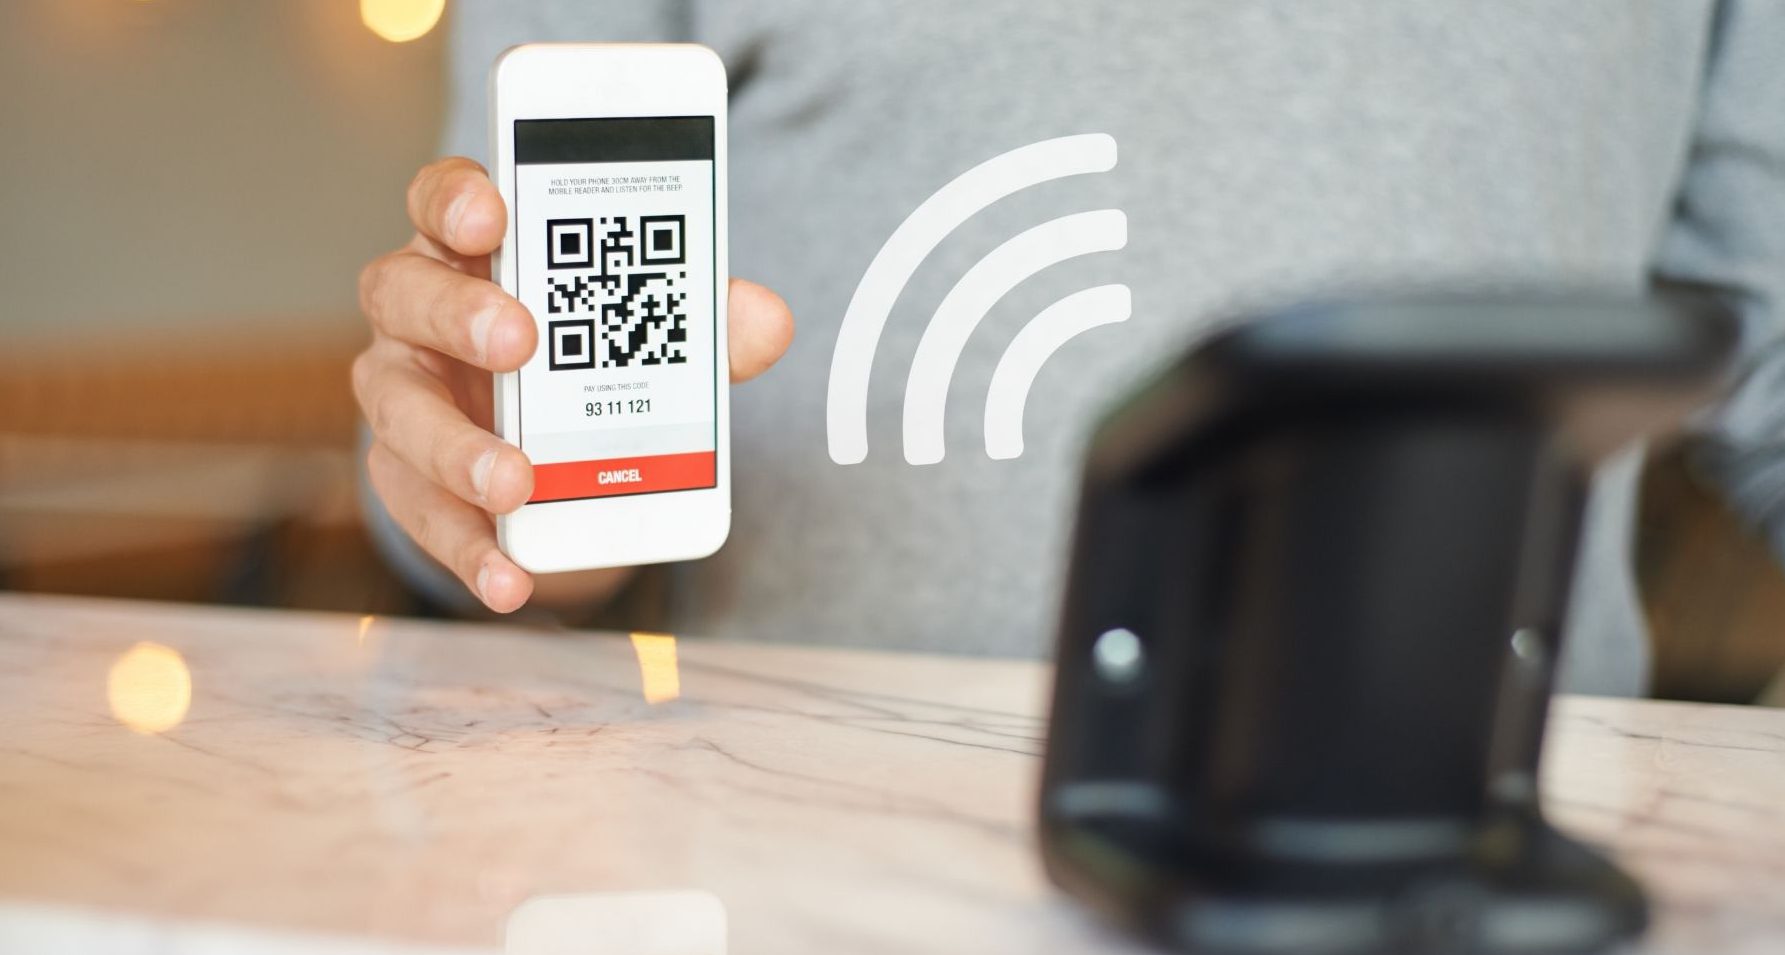 Global Digital Payments Market Overview And Prospects